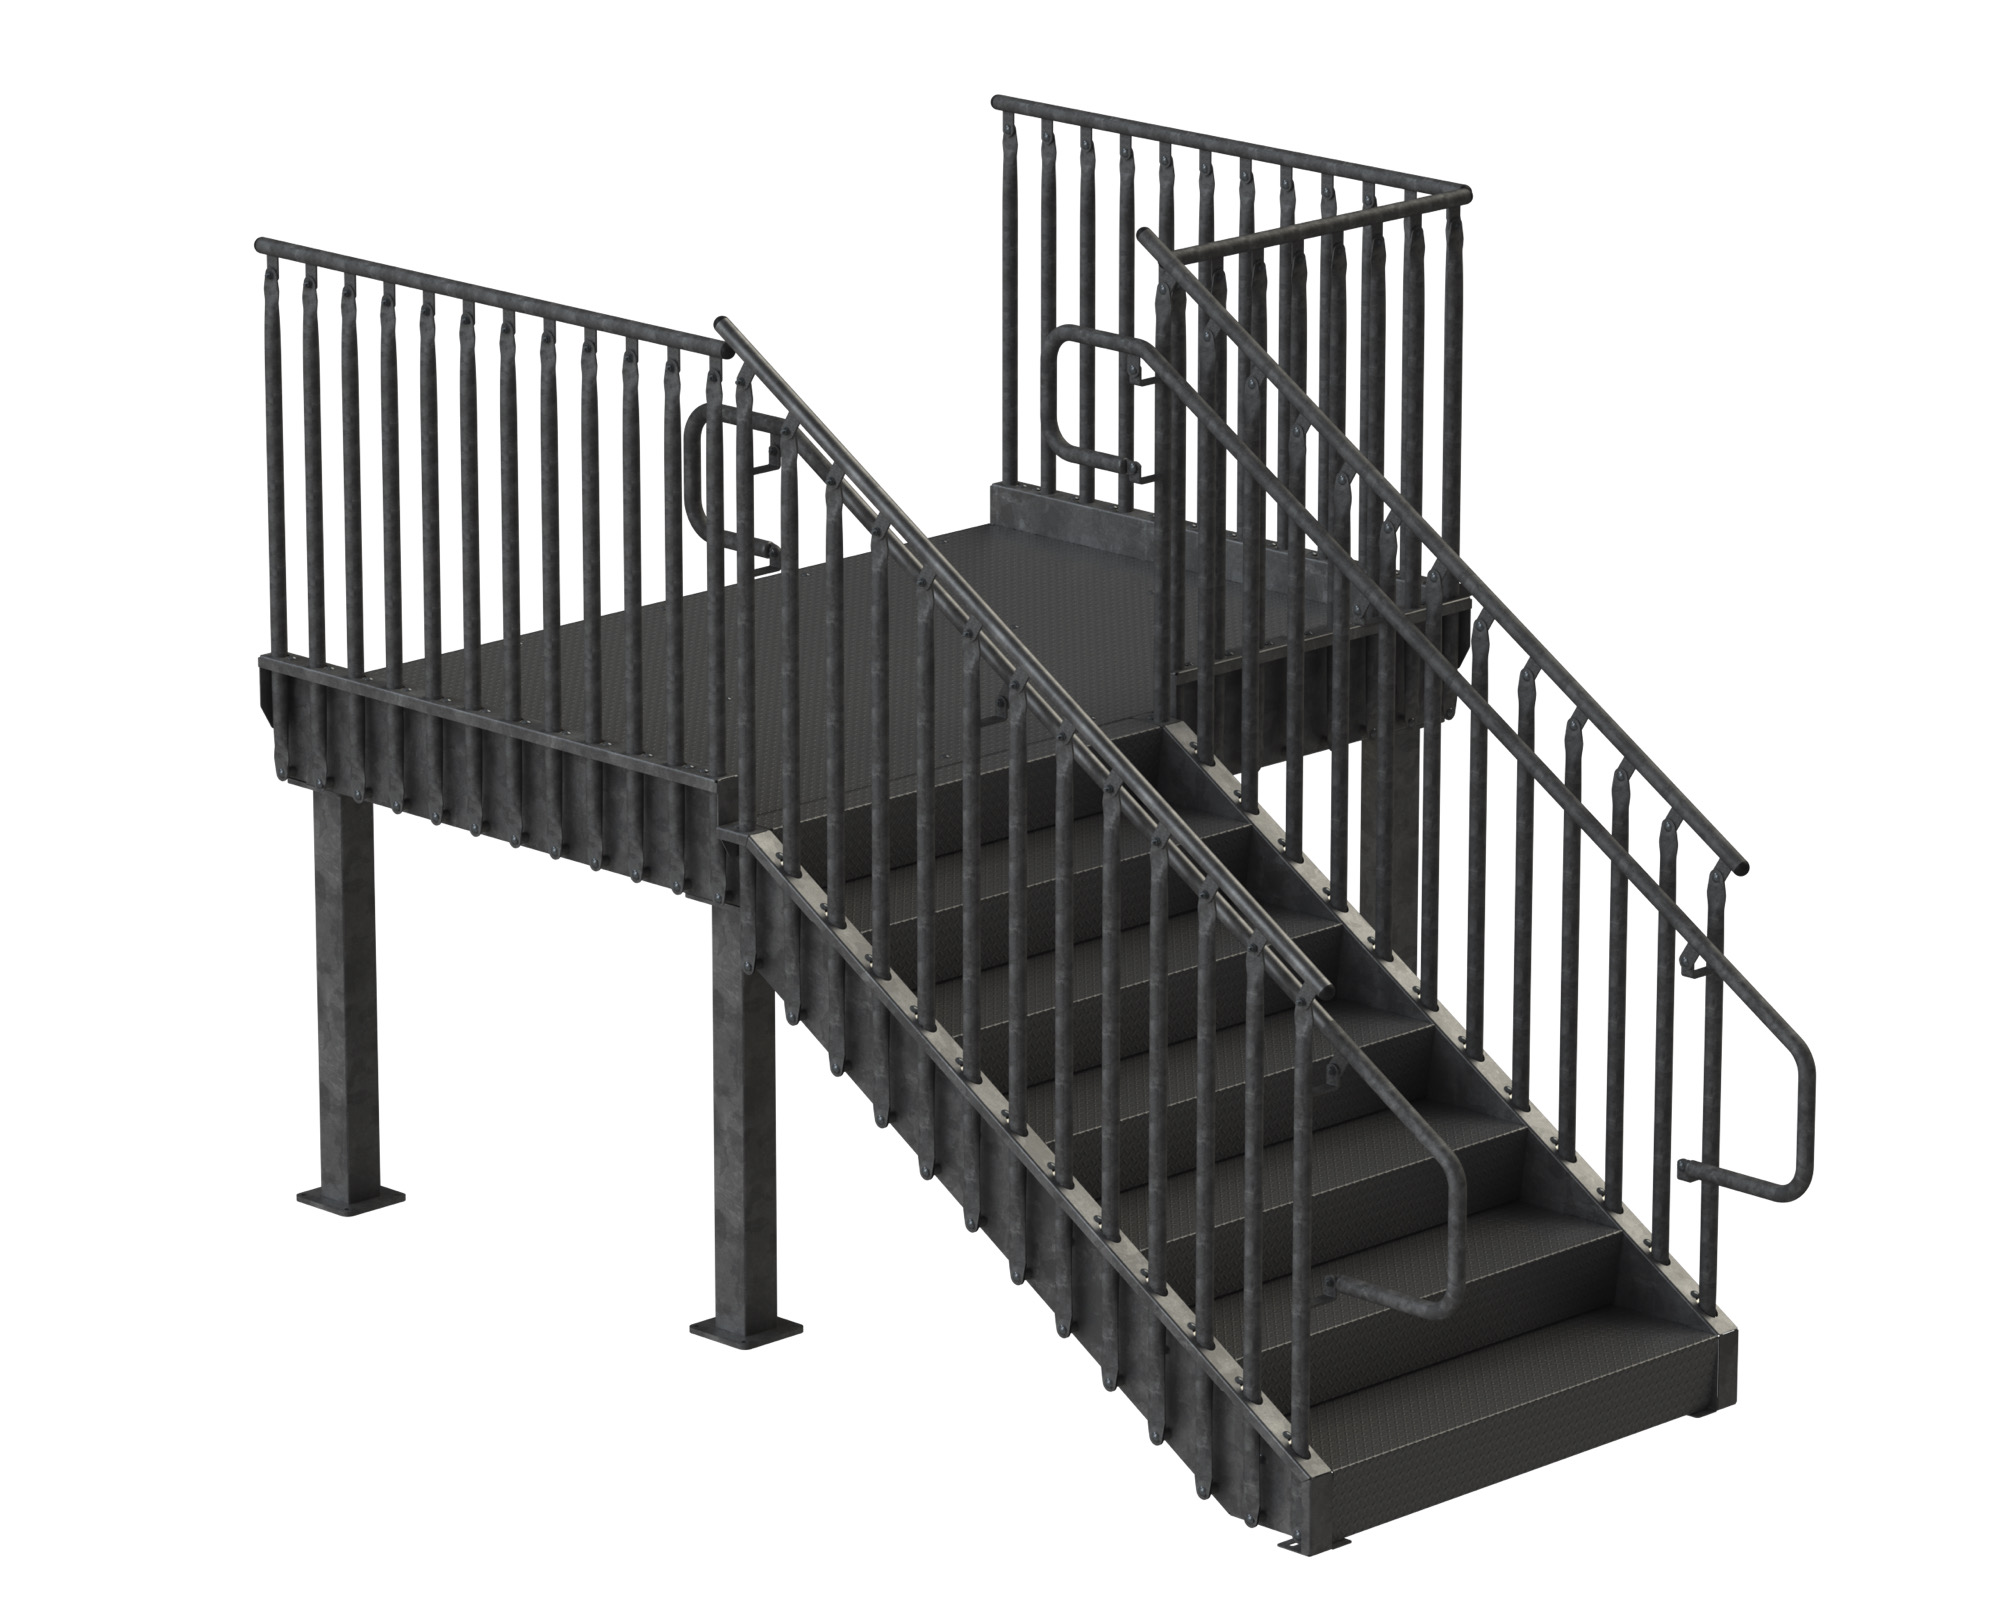 Loading Dock Stairs, Steel, Galvanized, Diamond Plate, IBC-Commercial, Accessible Platform